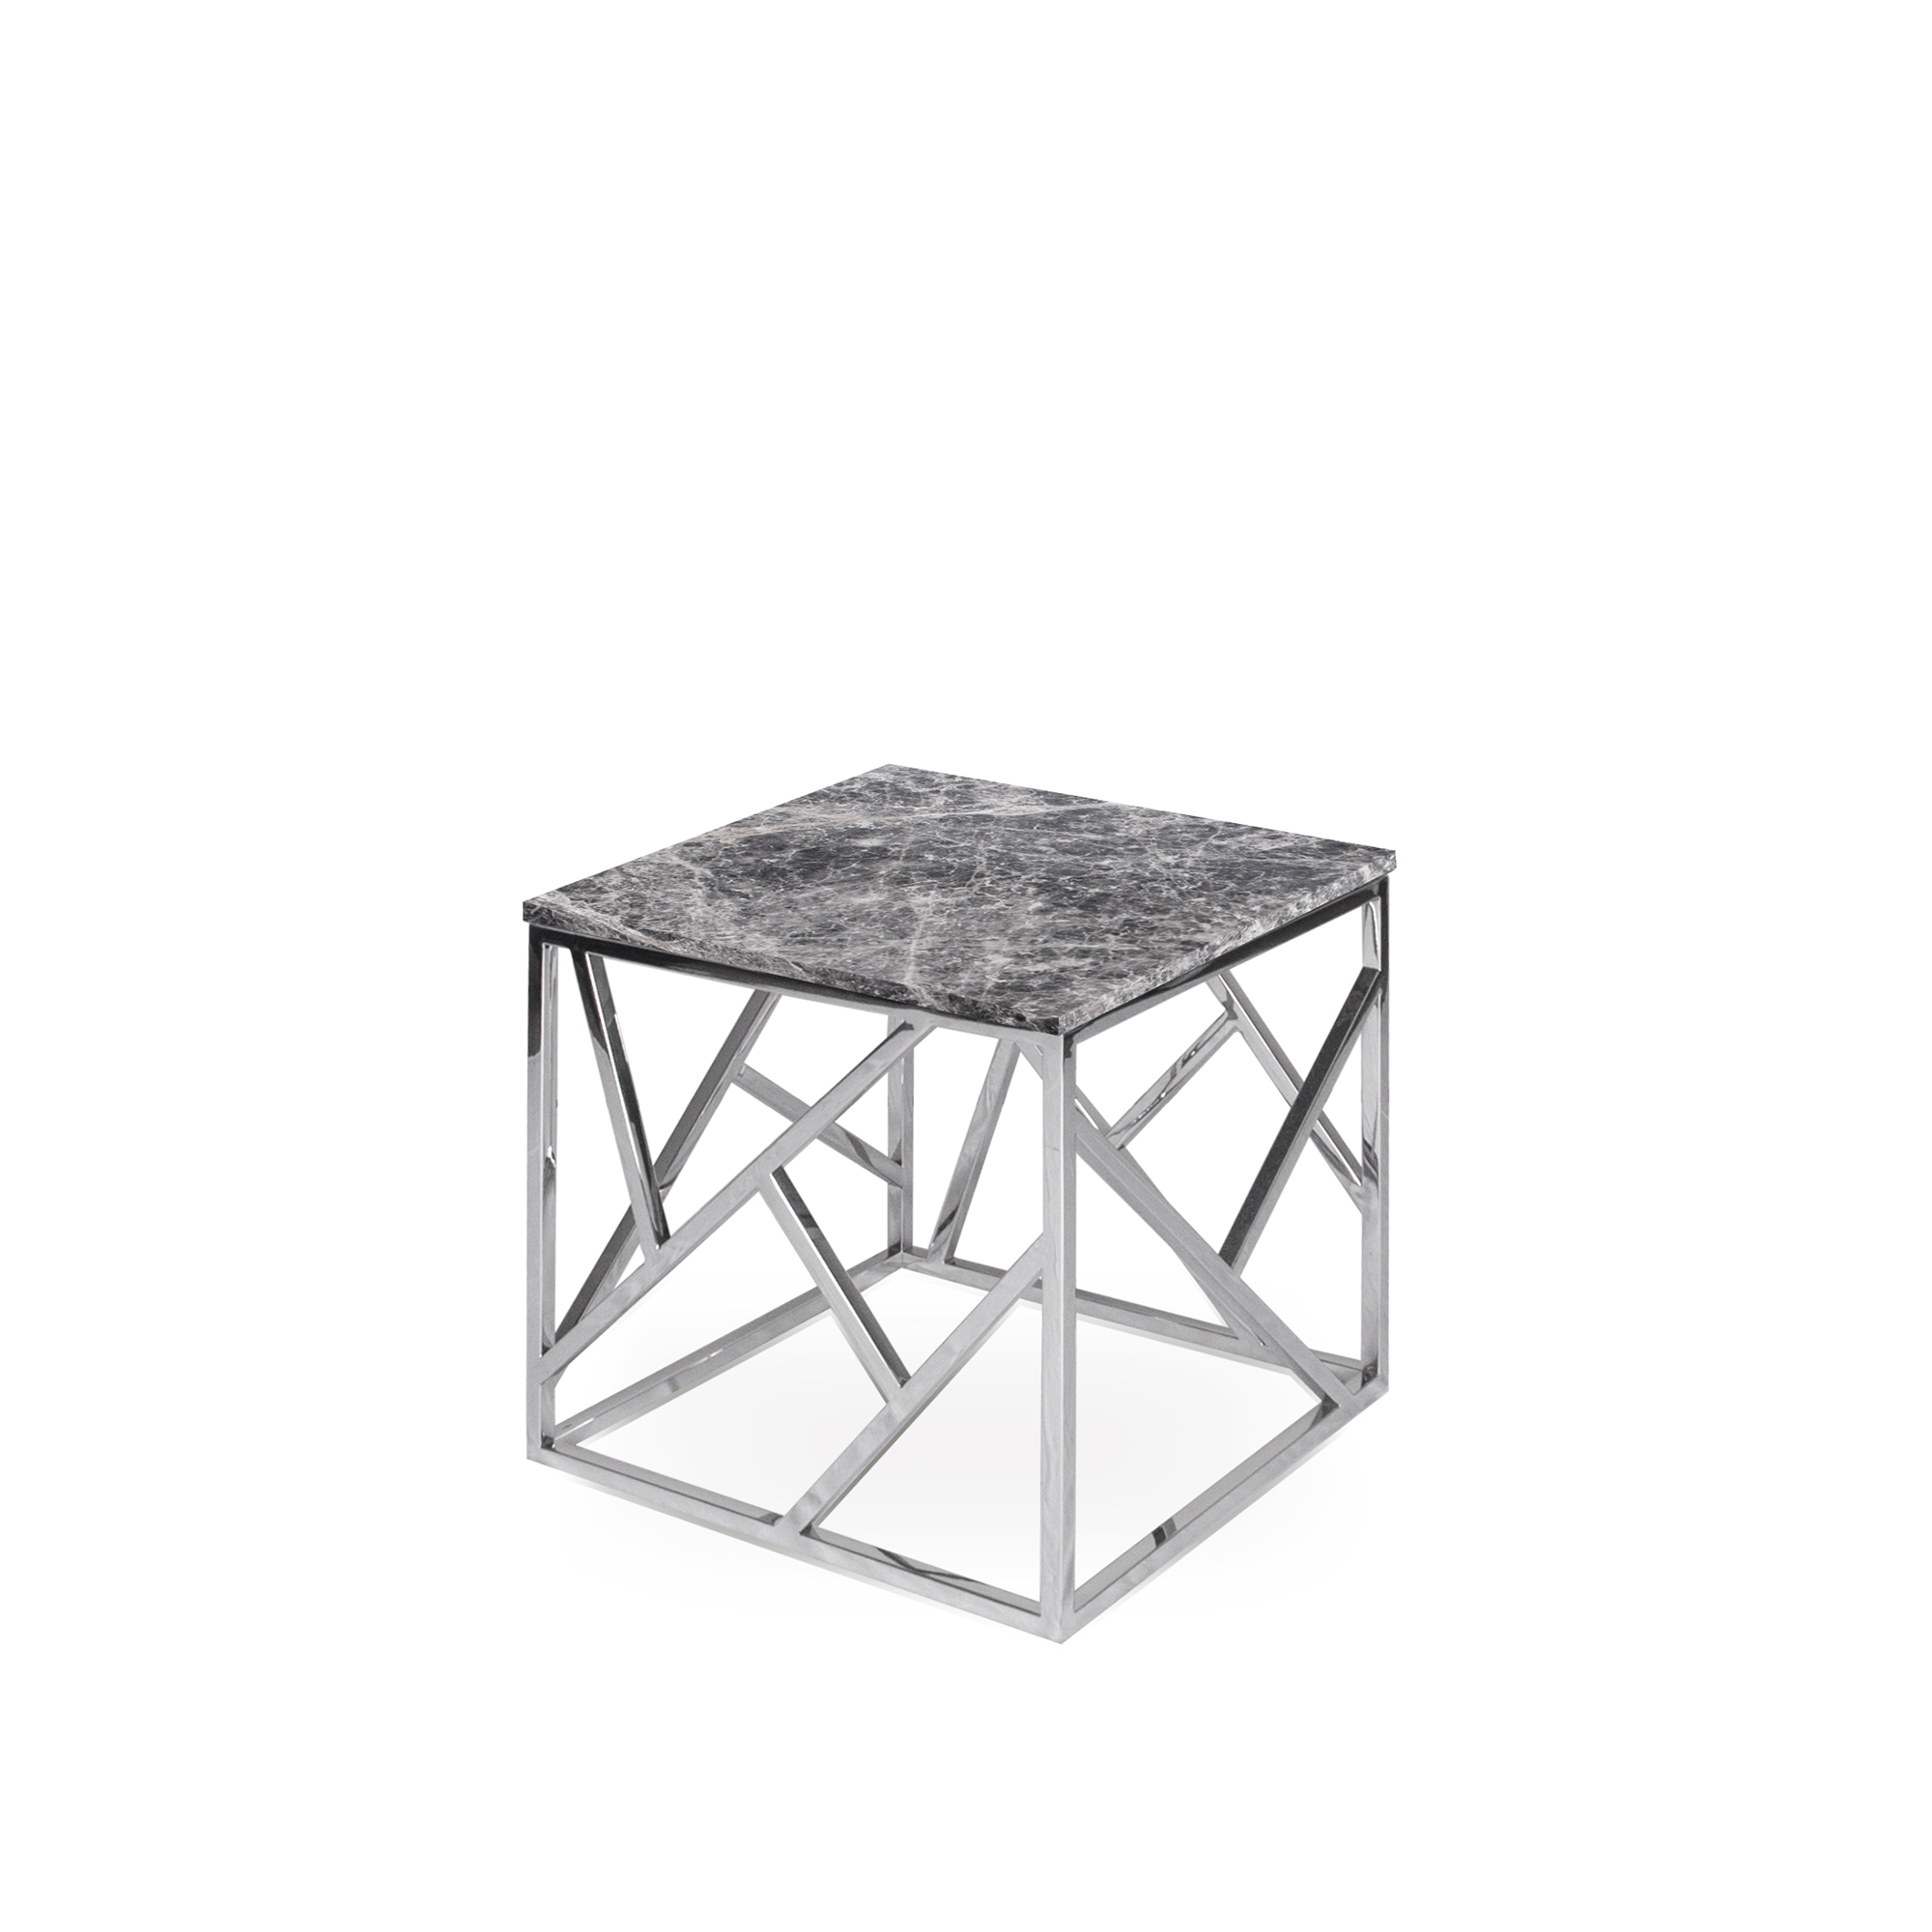 Miro S | Art Series | Decasa Marble Marble Dining Table